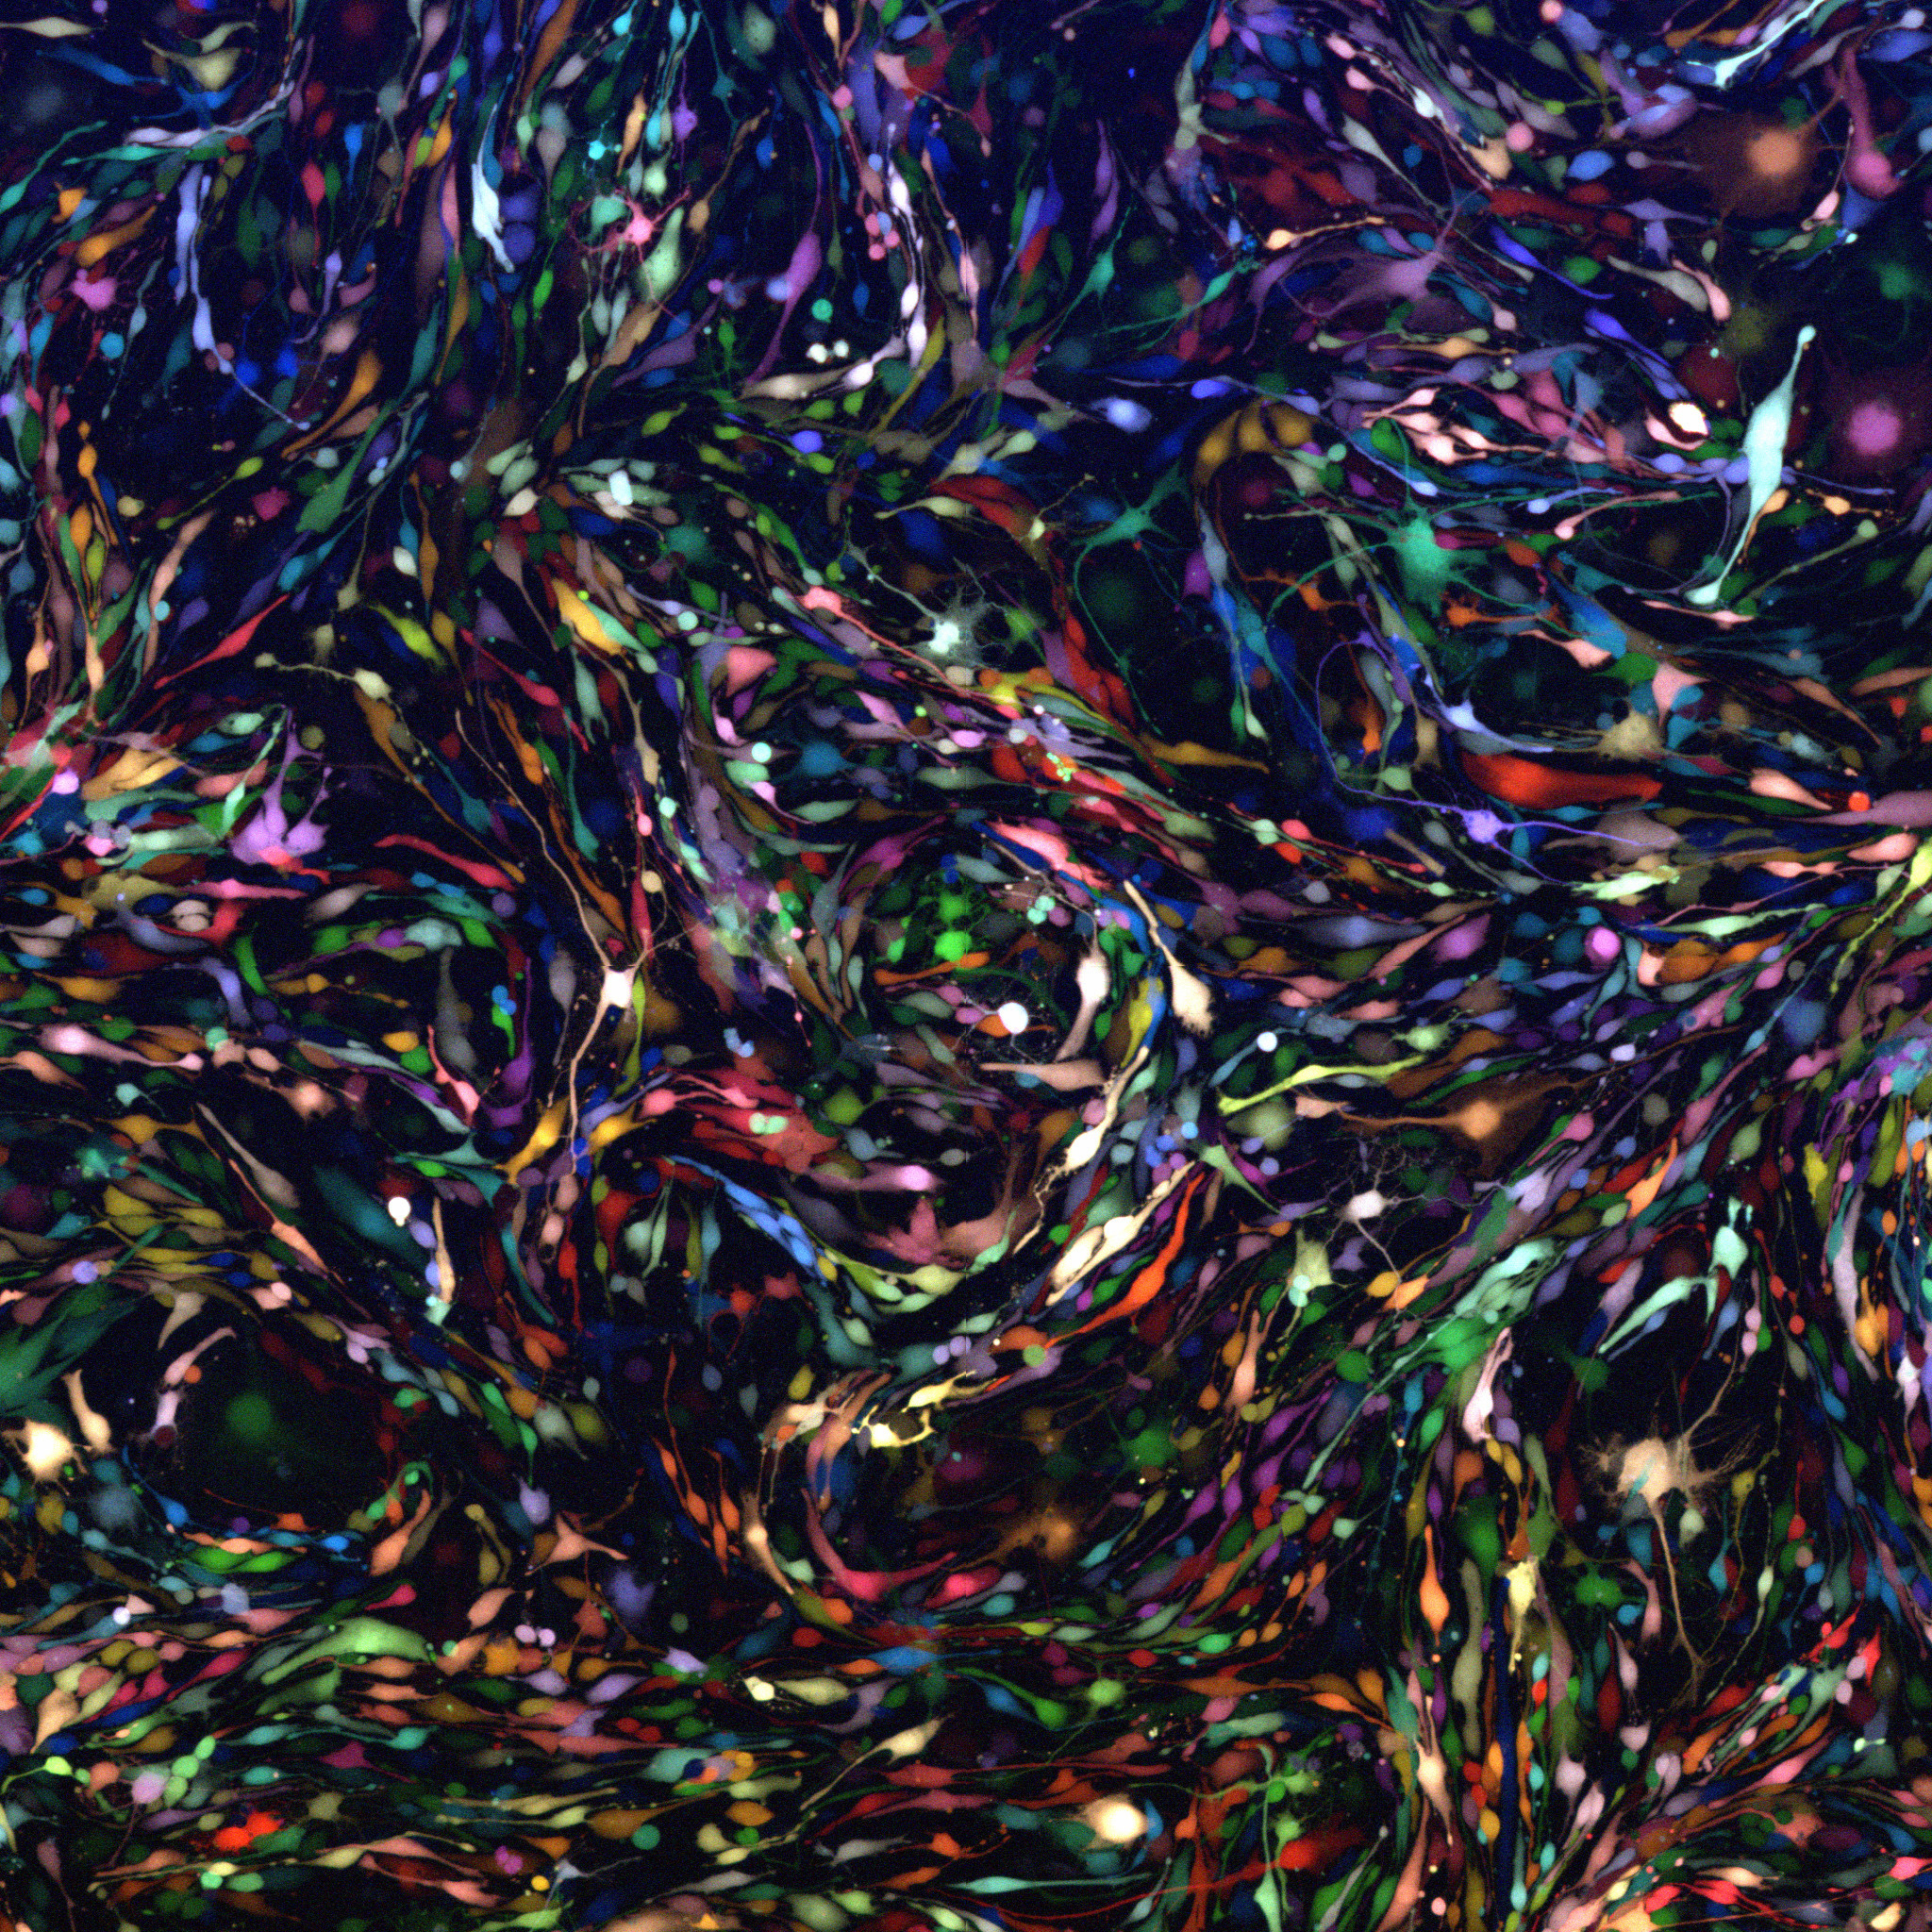 A swirl of colors on a black background which is actually brain tumor cells, magnified many times